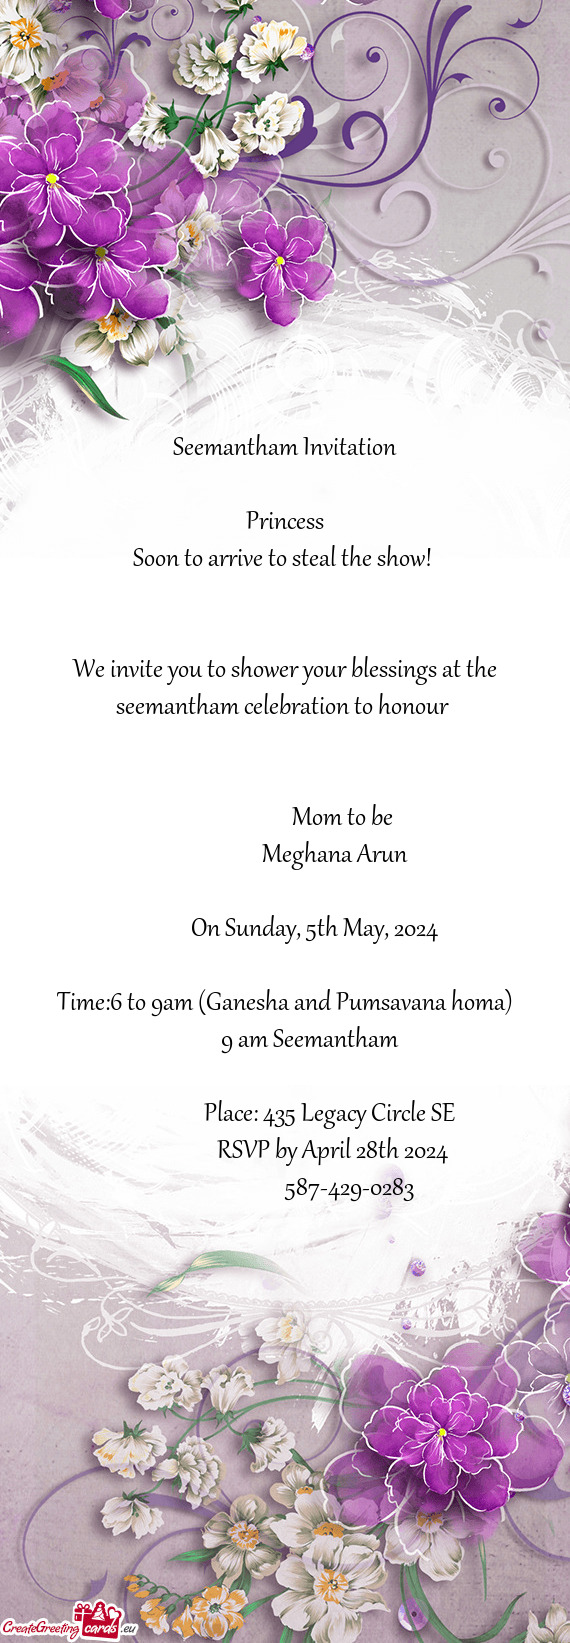 We invite you to shower your blessings at the seemantham celebration to honour